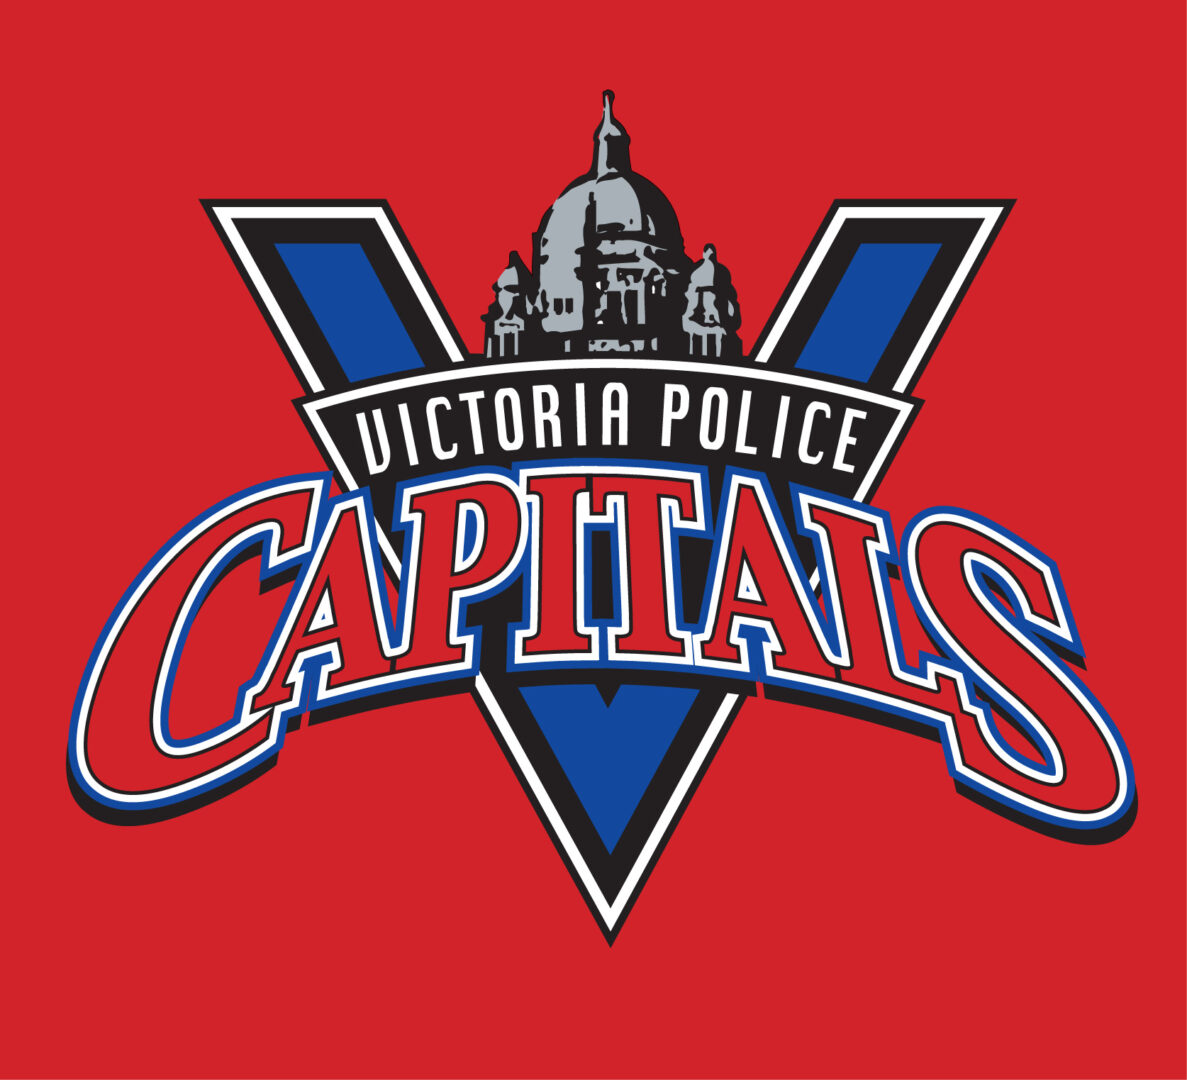 Capitals logo on red